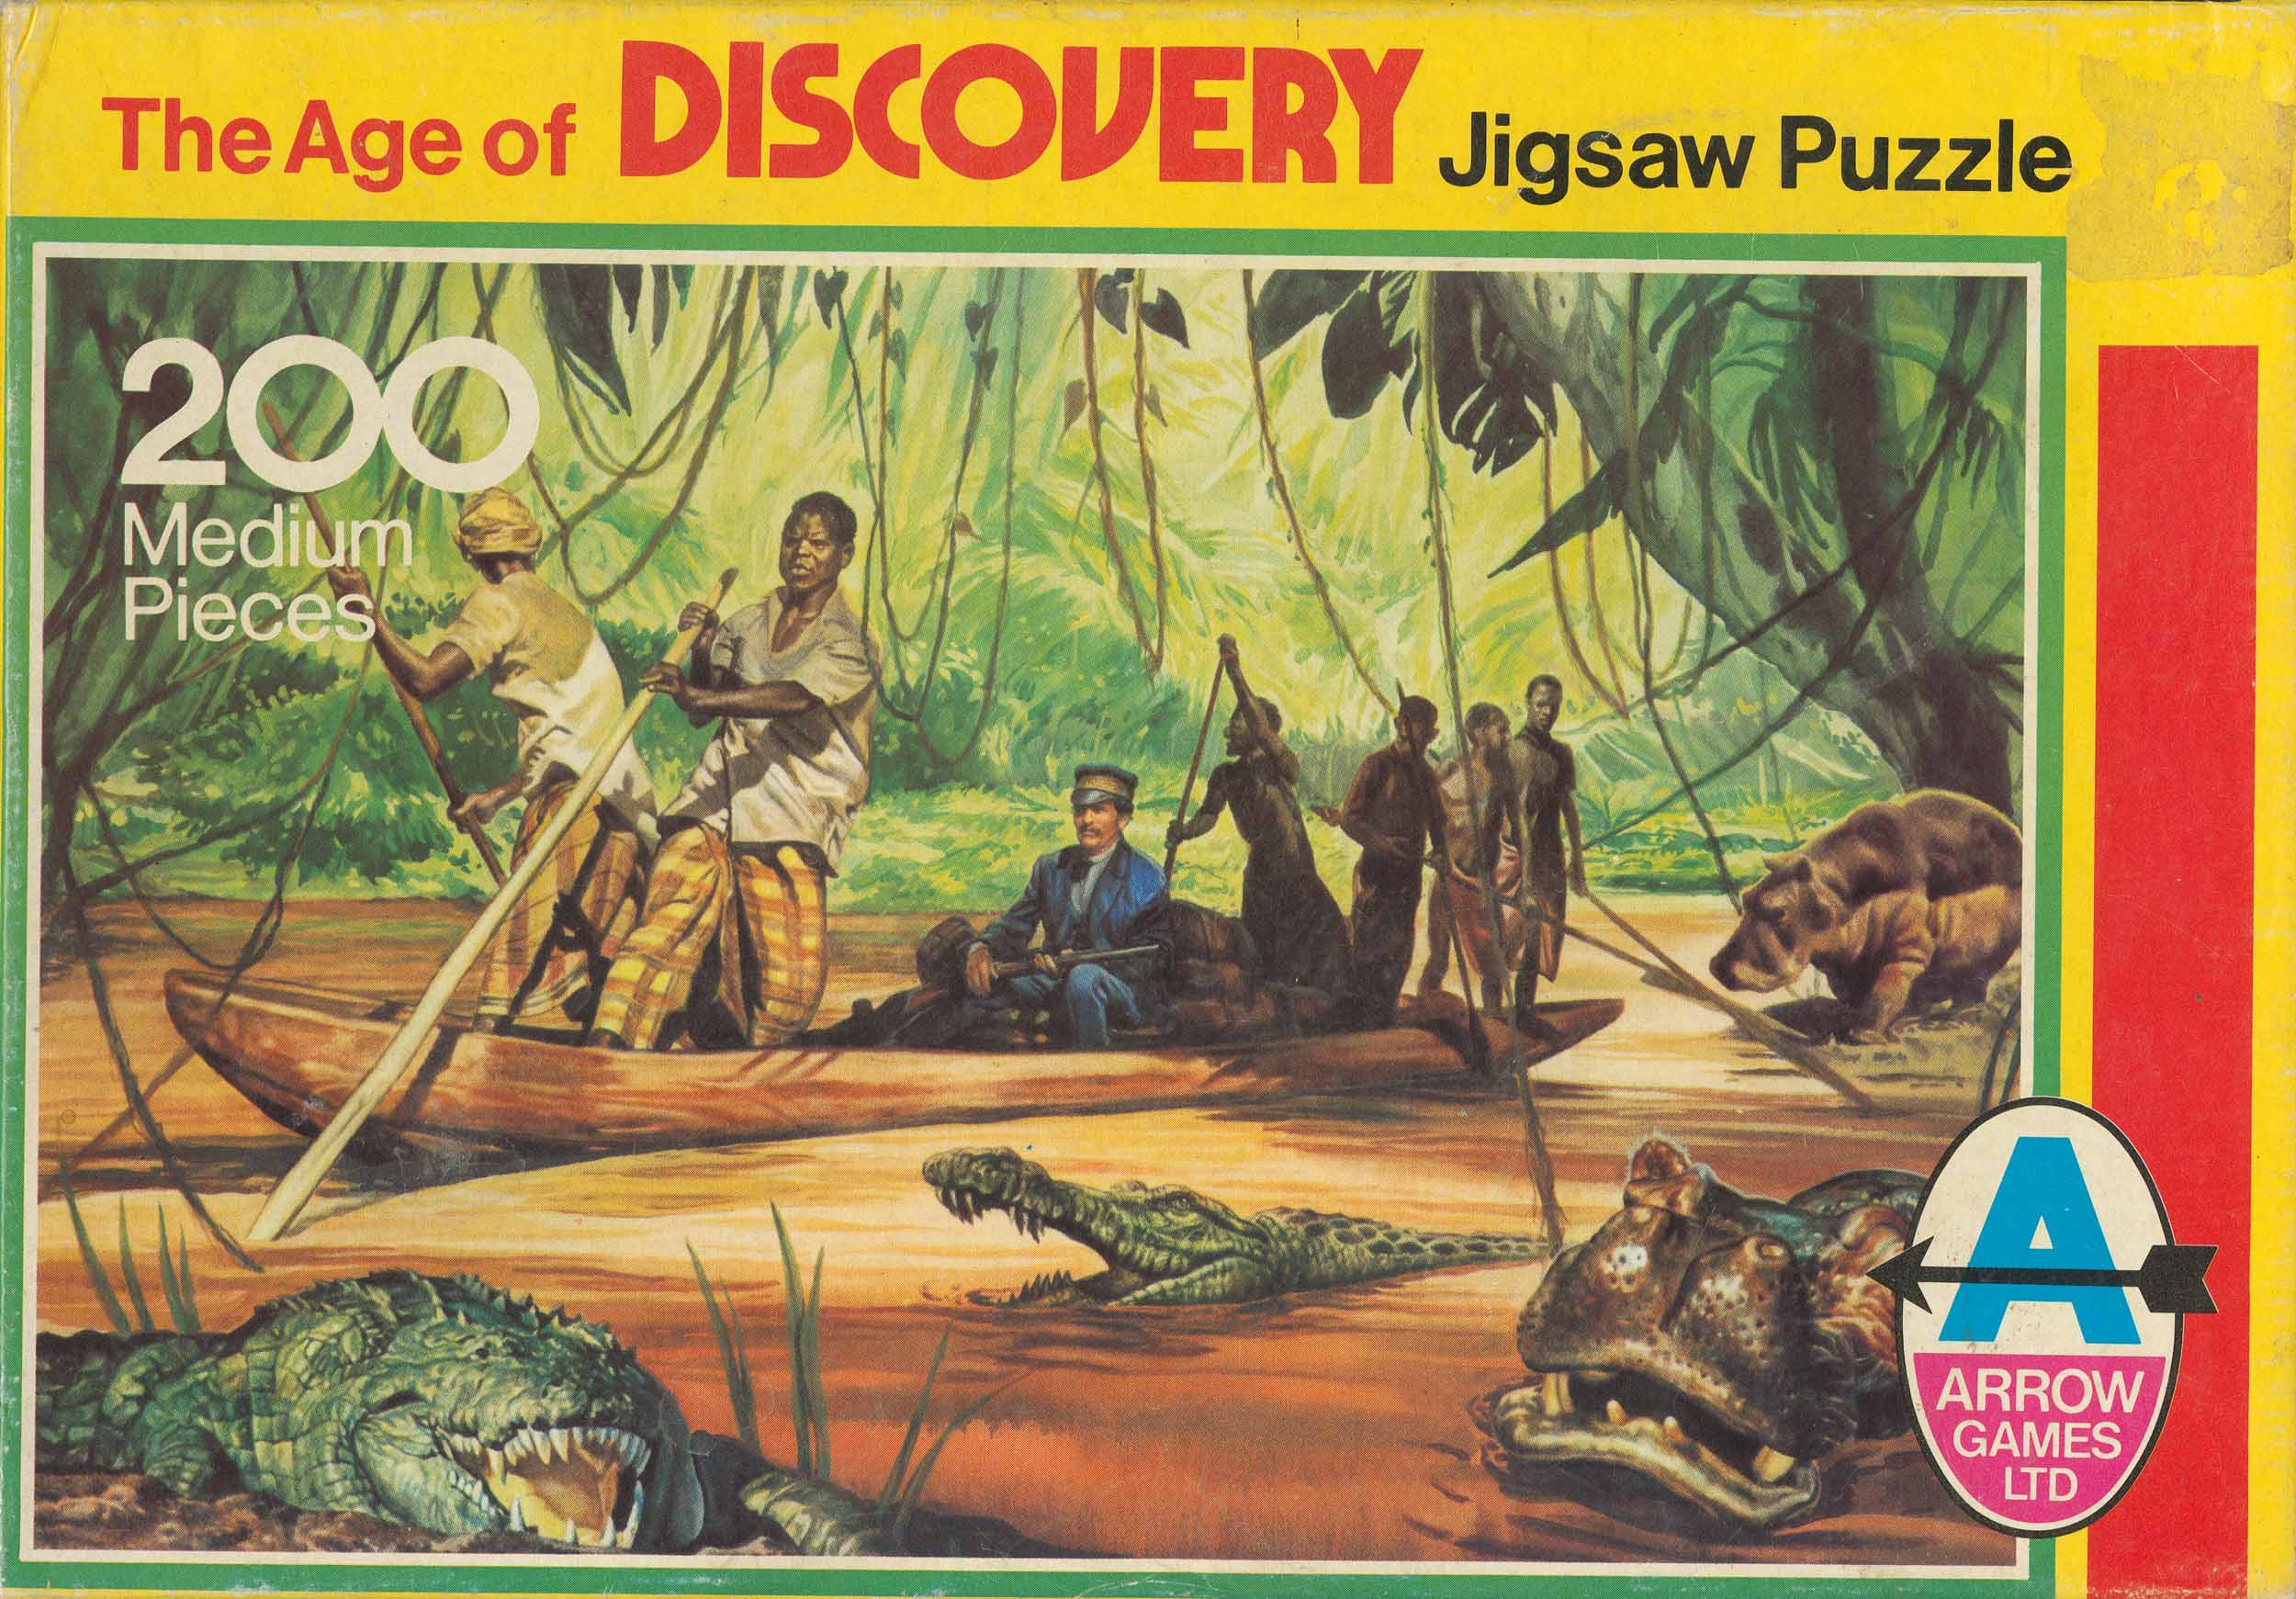 The Age of Discovery Jigsaw Puzzle: David Livingstone (Arrow Games, Ltd.) Copyright National Library of Scotland. Creative Commons Share-alike 2.5 UK: Scotland (https://creativecommons.org/licenses/by-nc-sa/2.5/scotland/).